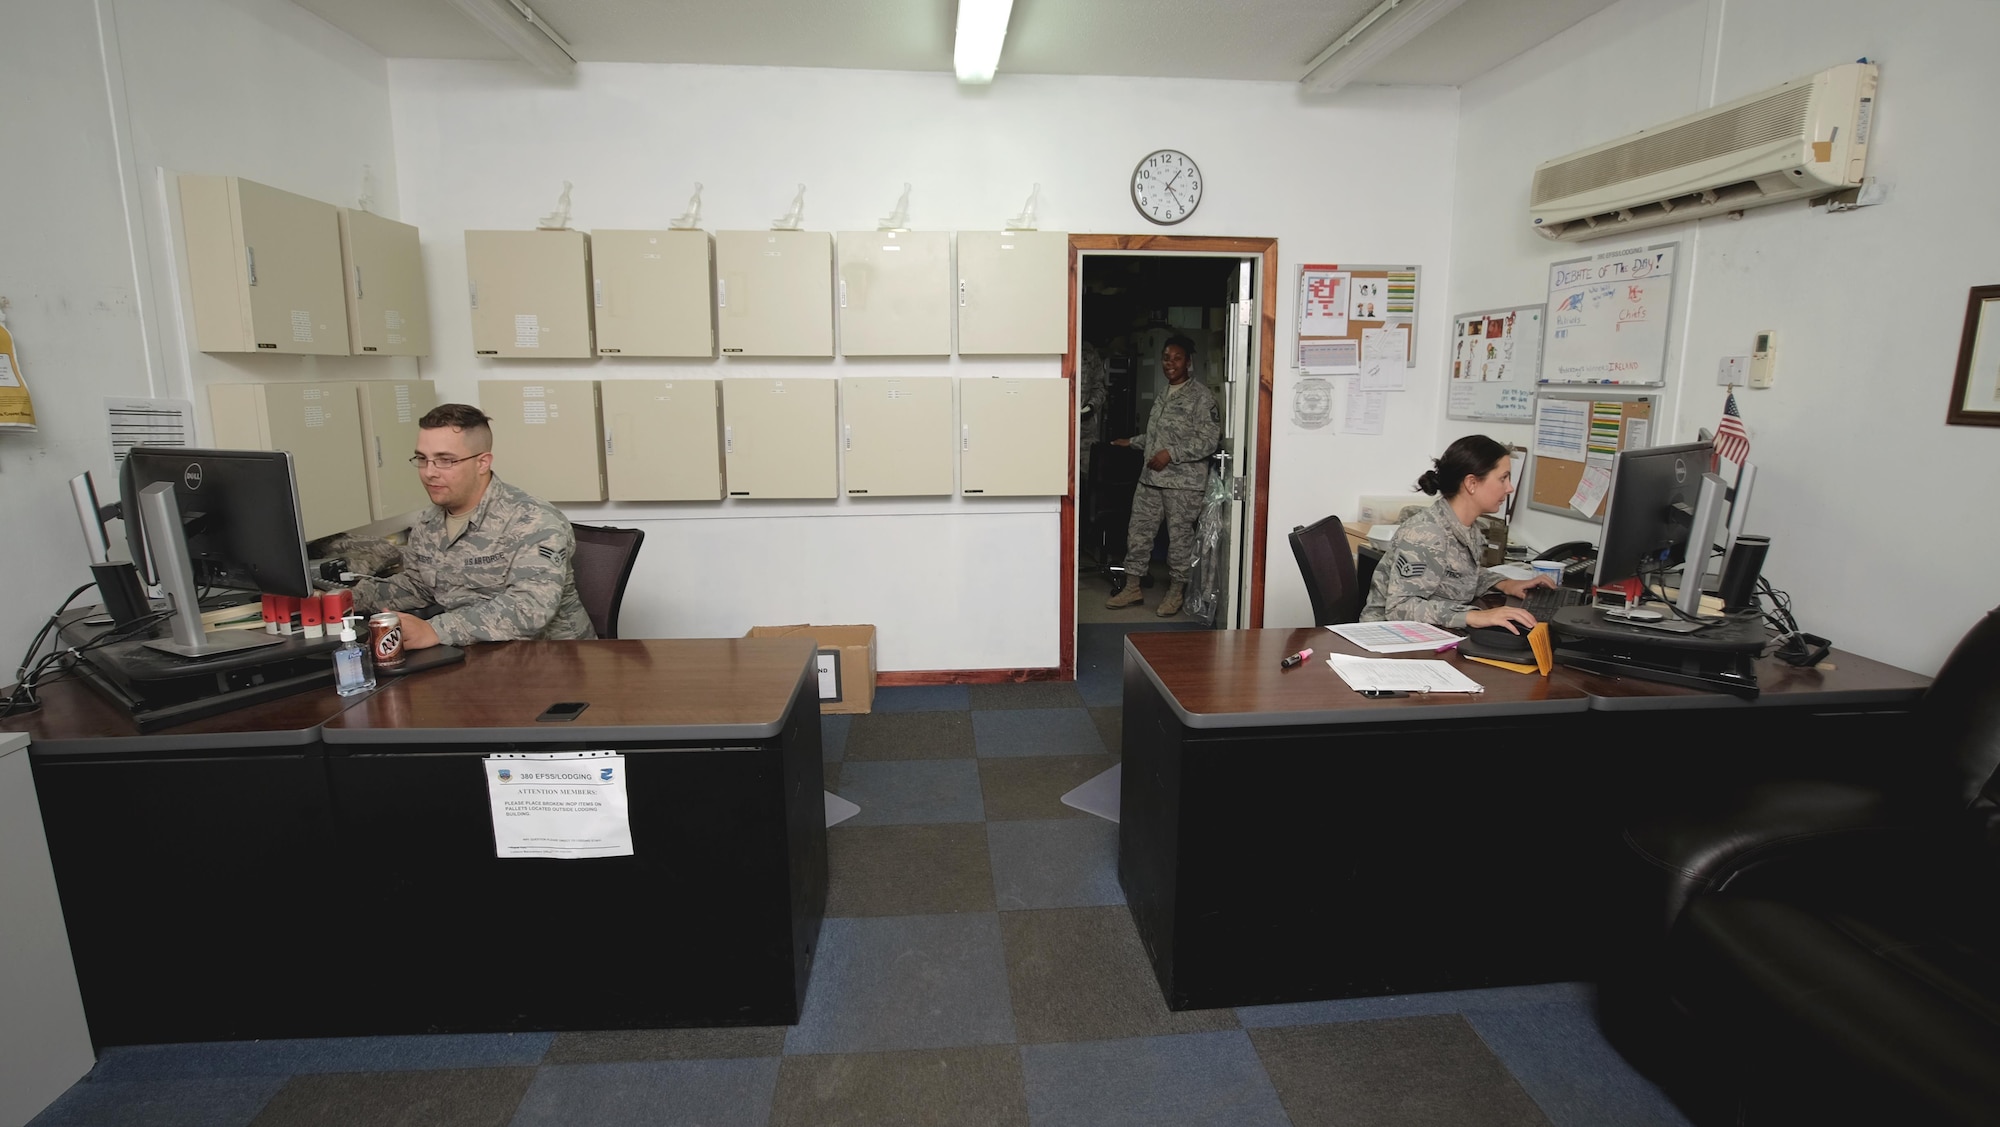 Members of the 380th Expeditionary Force Support Squadron Lodging Office file work orders Sept. 7, 2017, at Al Dhafra Air Base, United Arab Emirates.